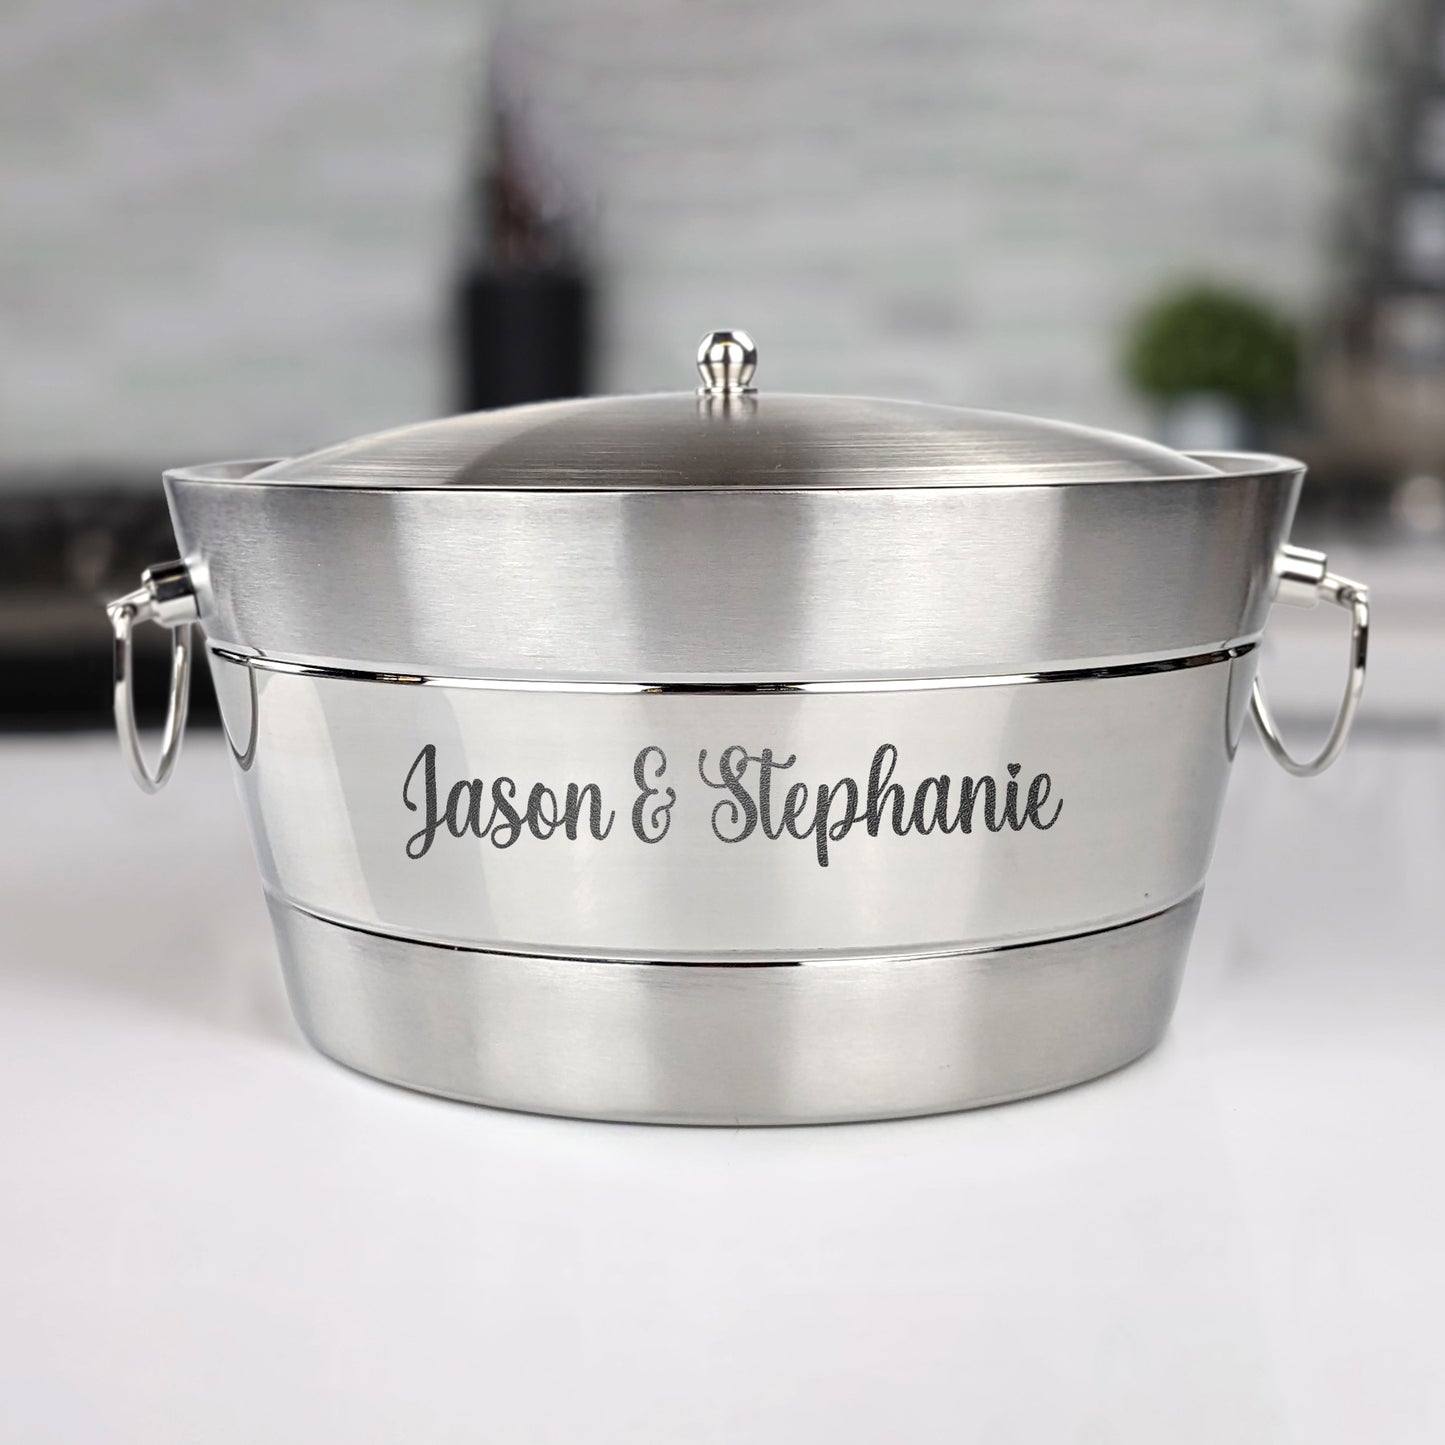 Personalized Ice Bucket with Lid - Ribbed Stainless Steel Anchored by BREKX